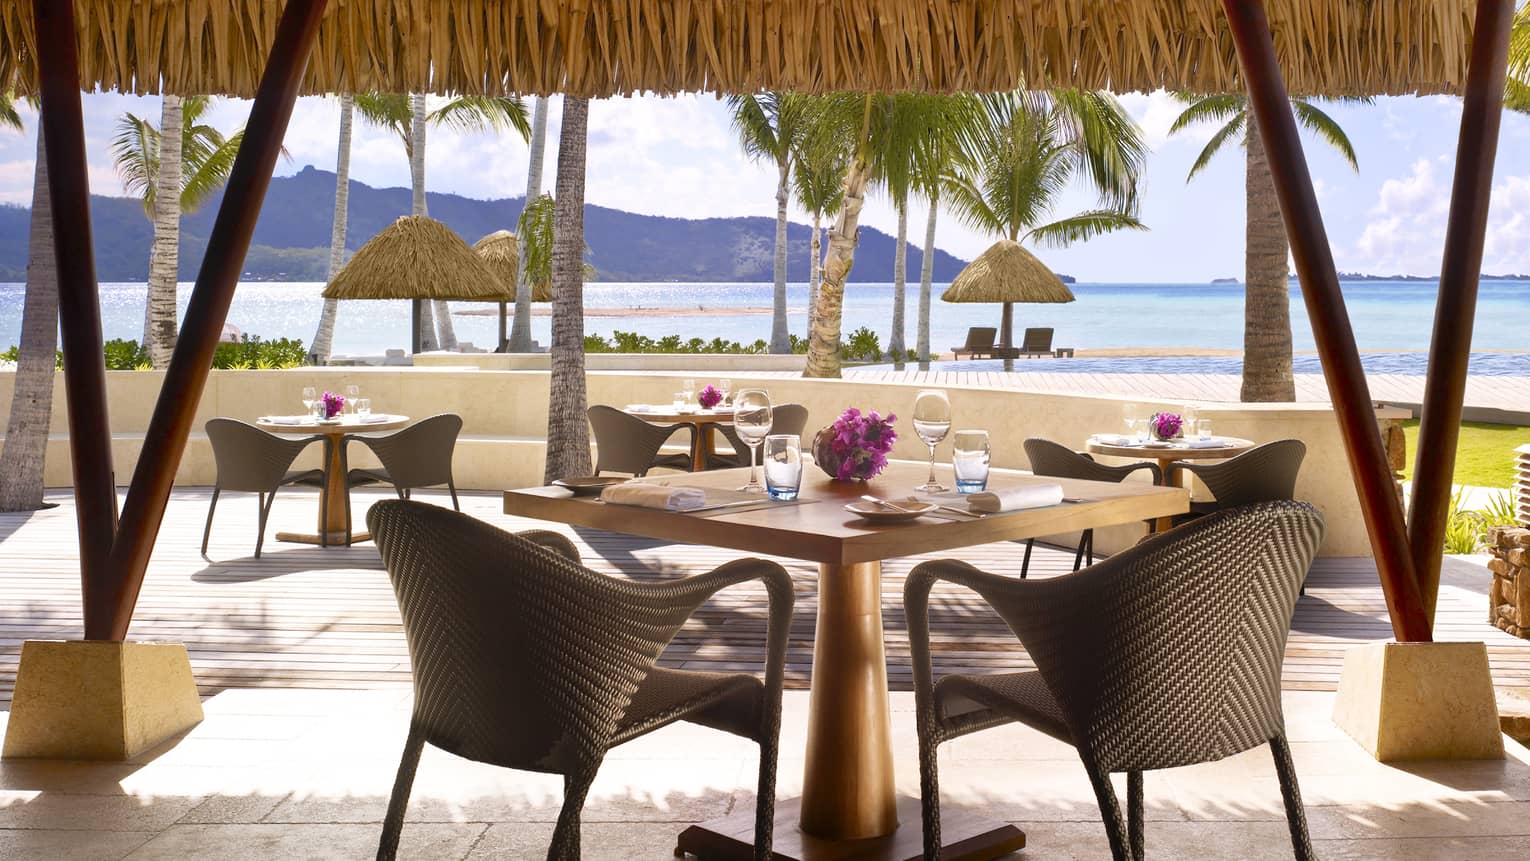 Tere Nui restaurant patio dining tables under flat thatched roof looking out at beach